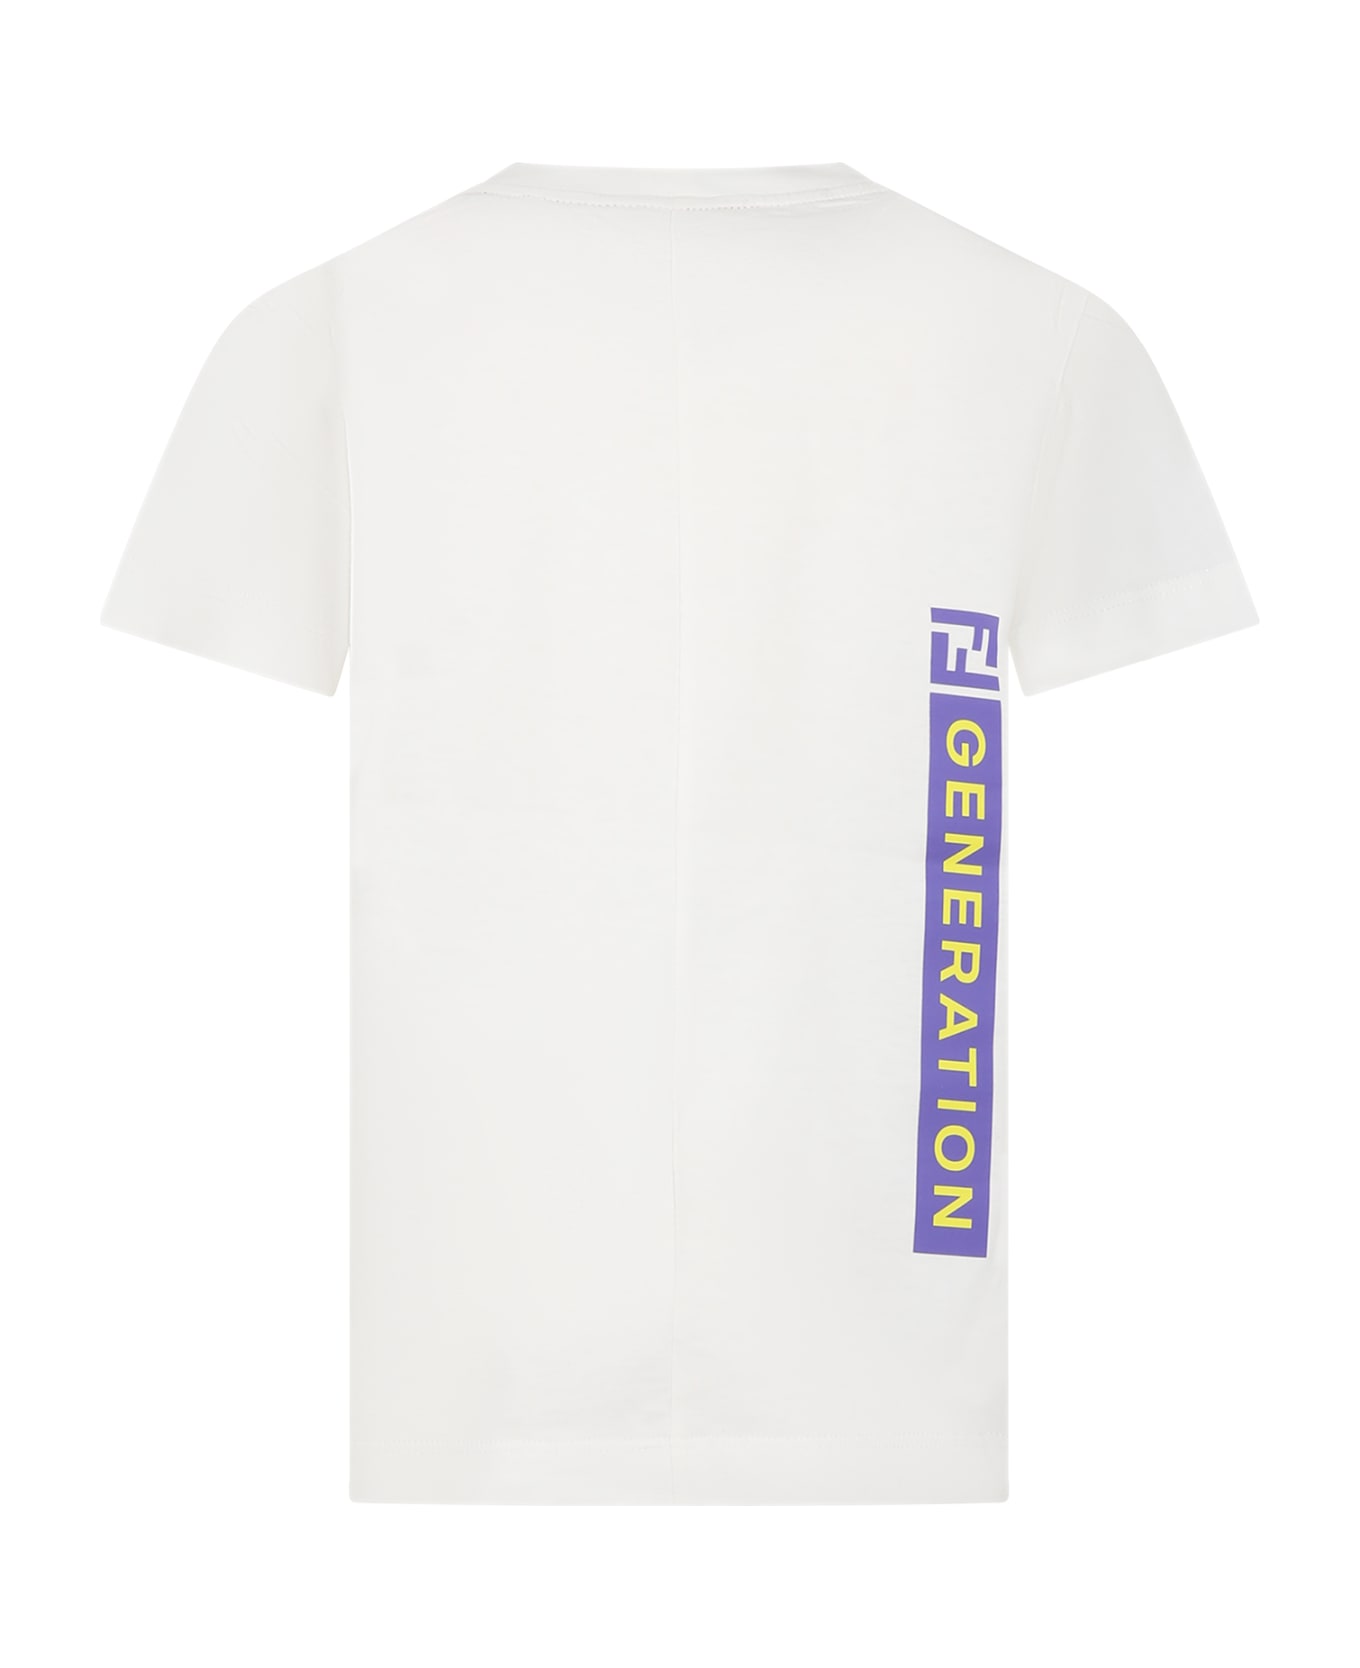 Fendi White T-shirt For Boy With Print And Double Ff - White